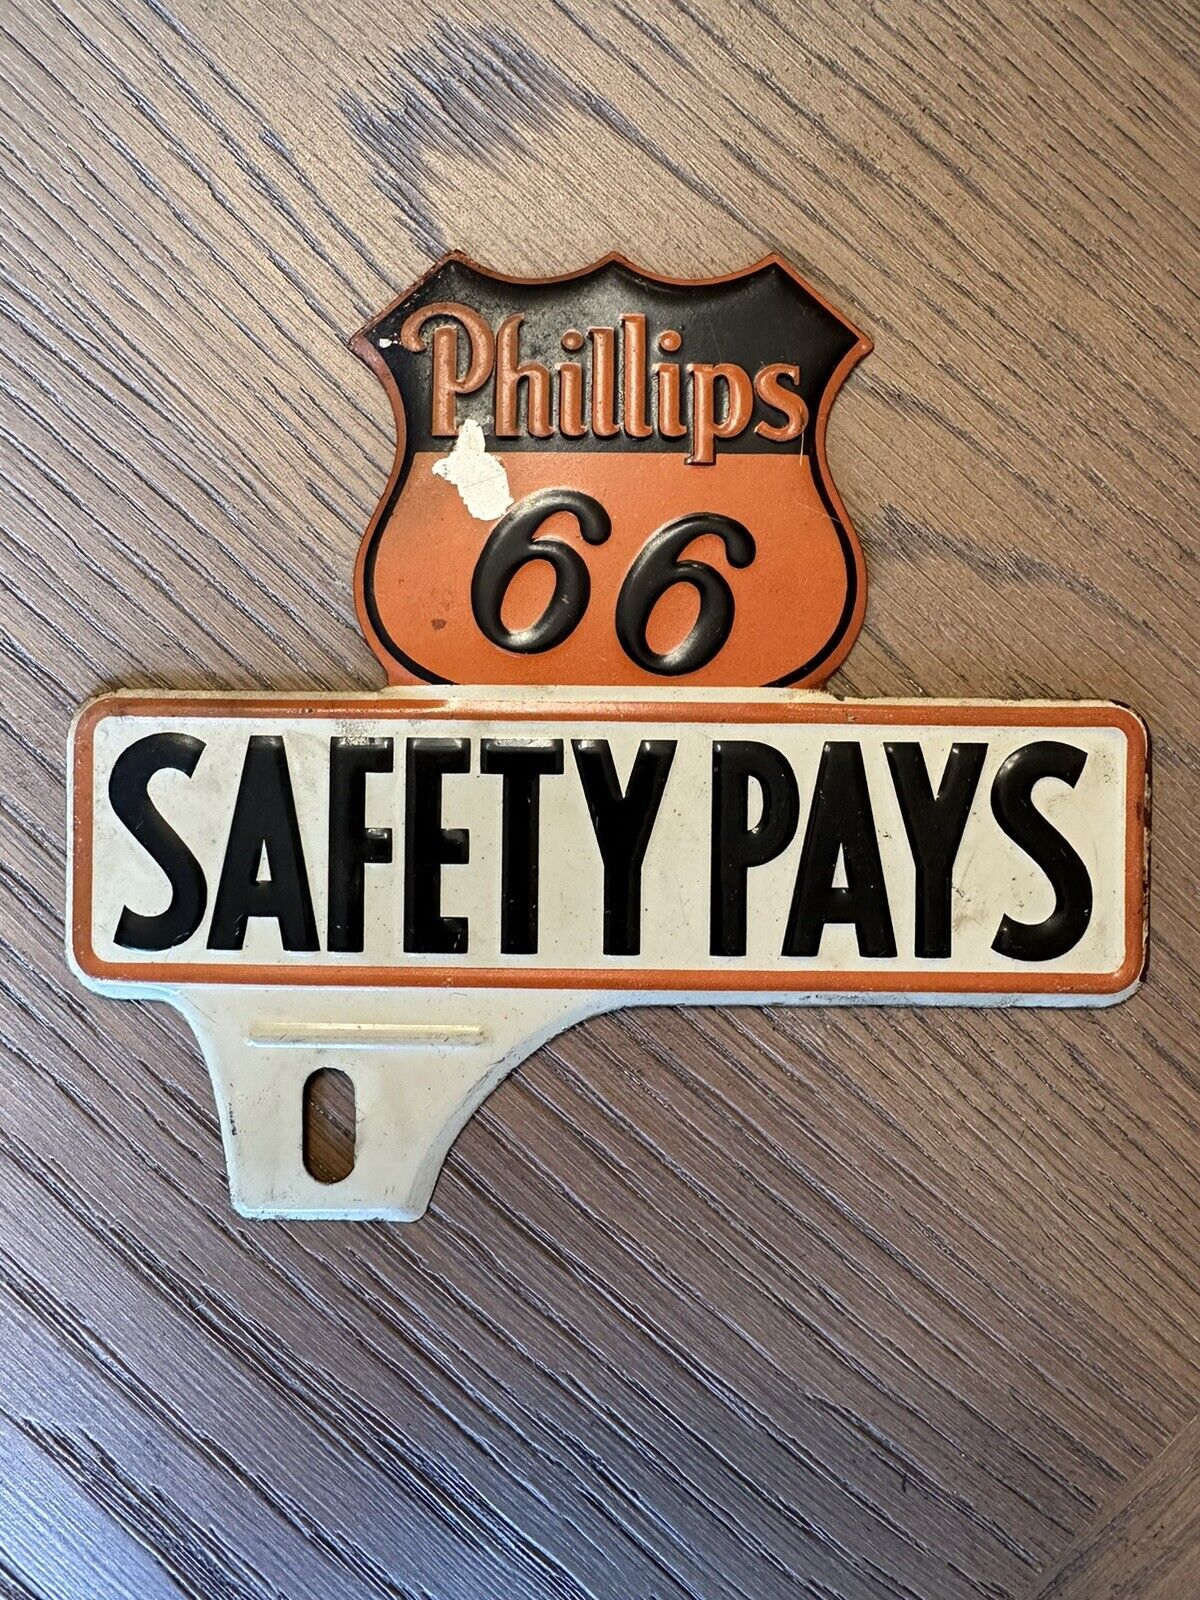 Original Phillips 66 Sign License Plate Topper Advertising Automobile Gas Oil